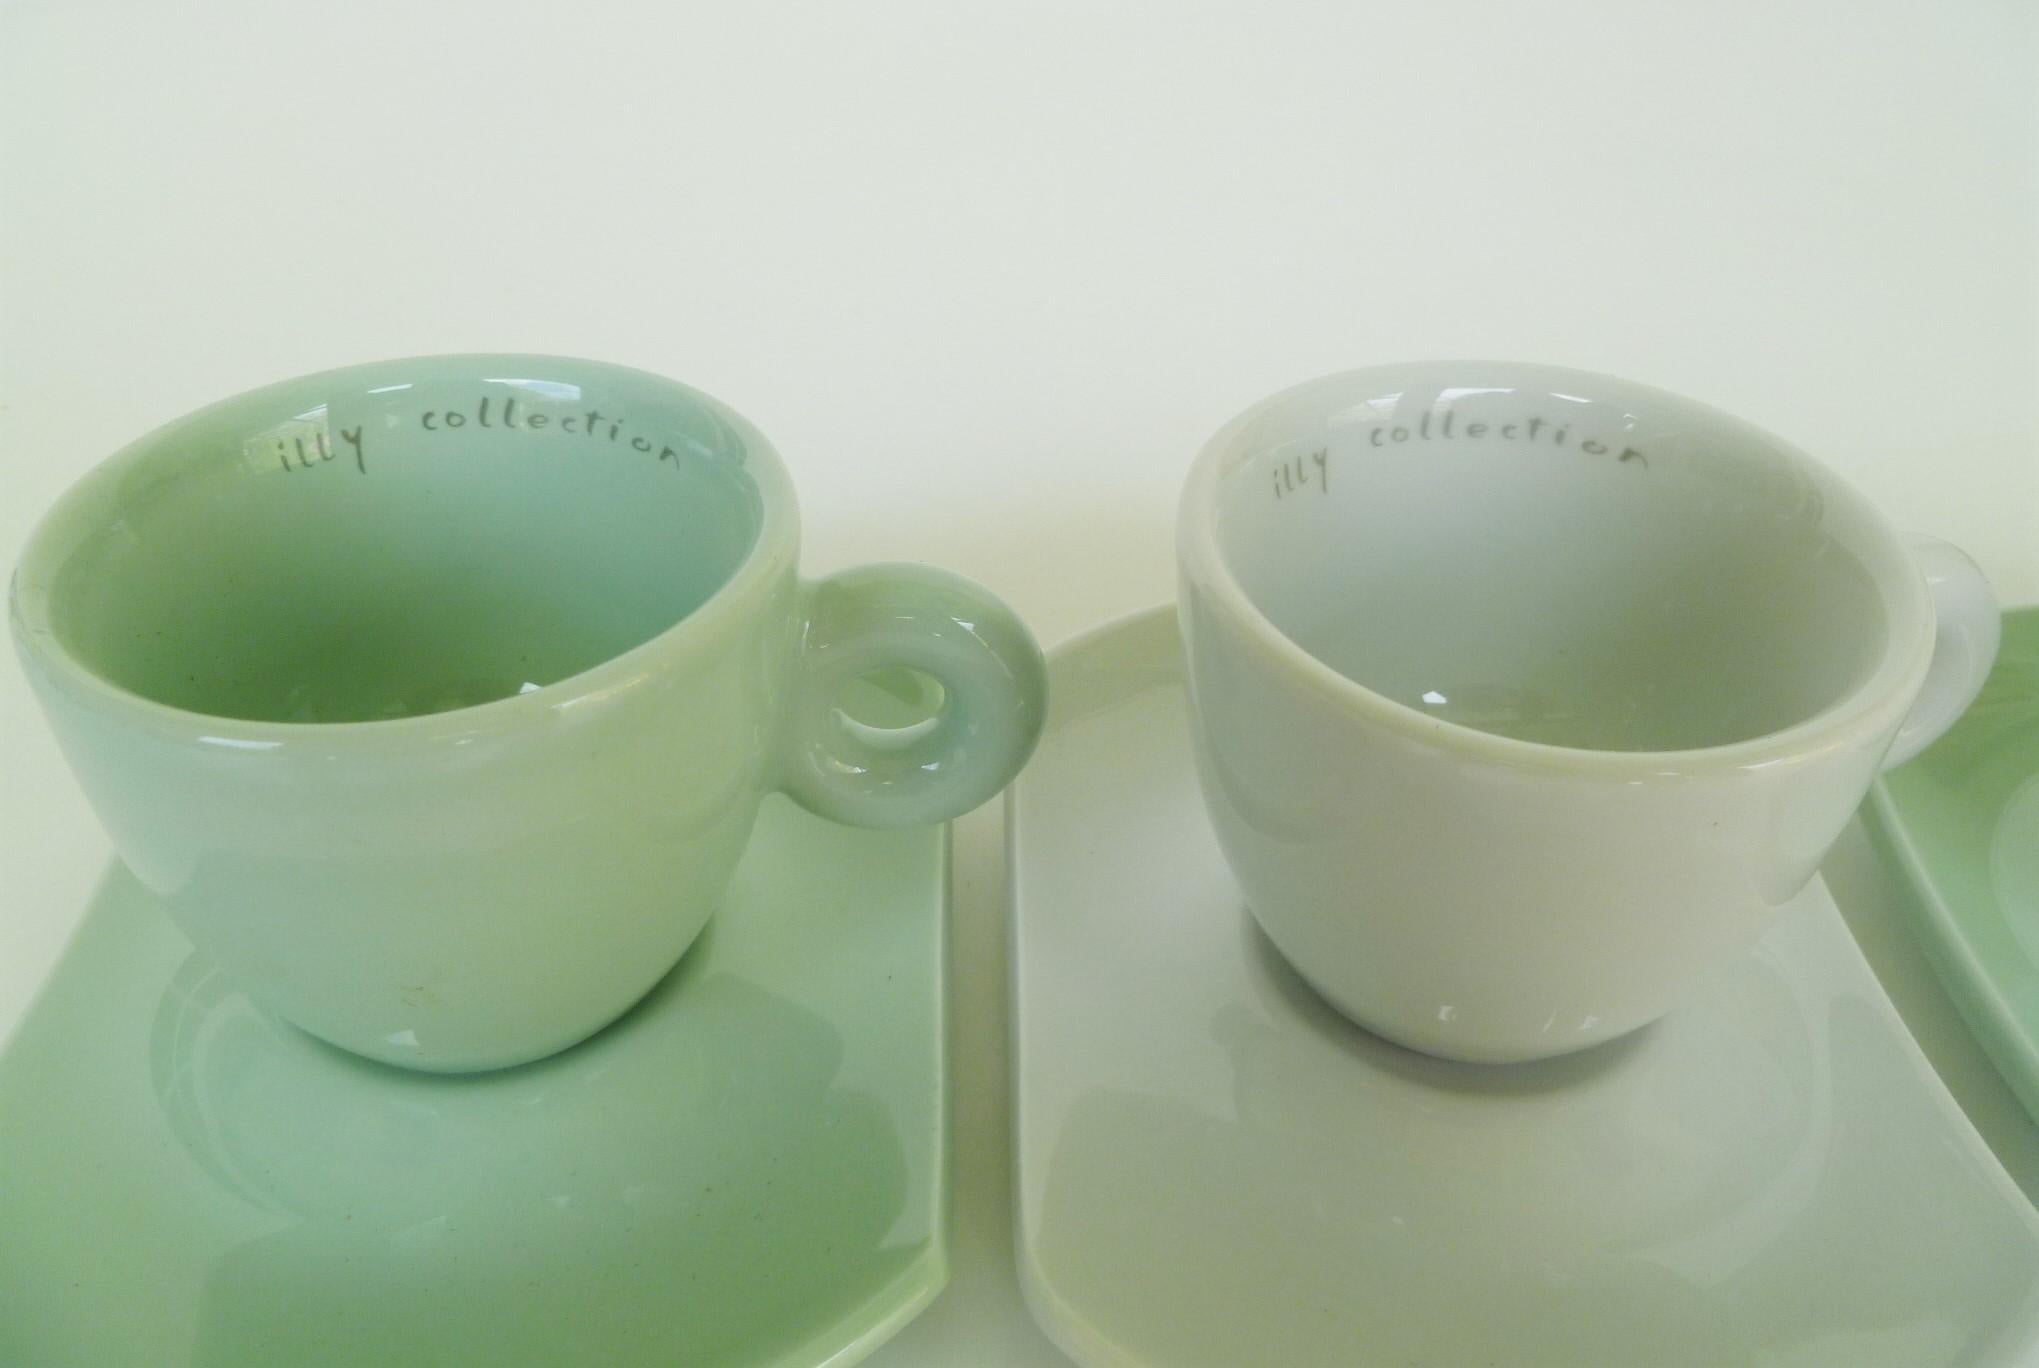 Italian Daniel Buren Illy Collection 2004 Bianco Verde Expresso Cups and Saucers